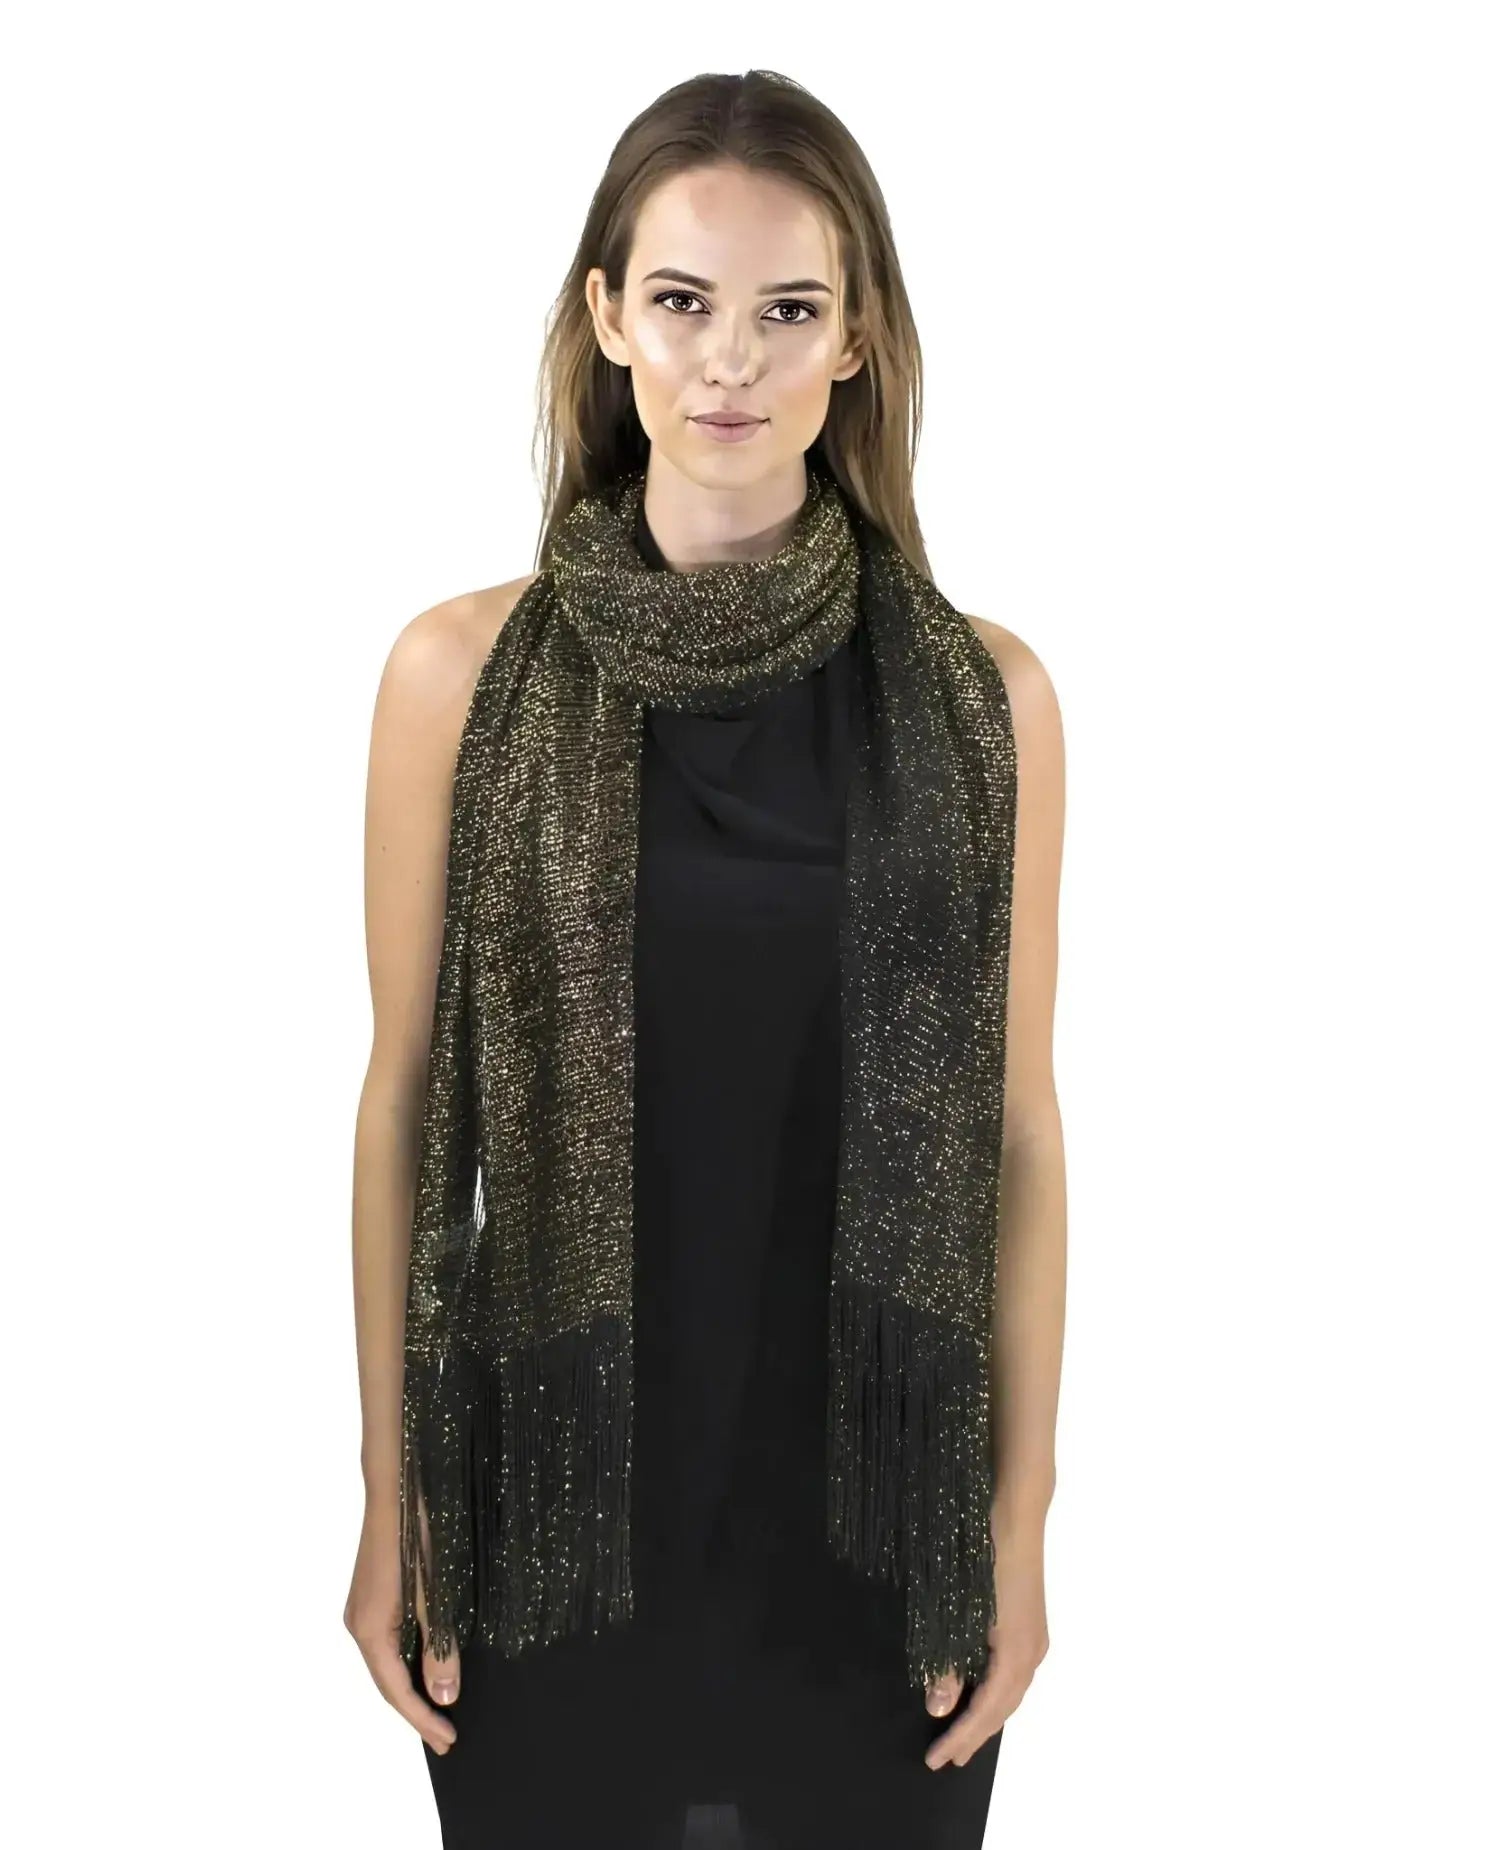 Woman in black top and gold scarf from Shimmering Lurex Fishnet Evening Shawl Scarves.